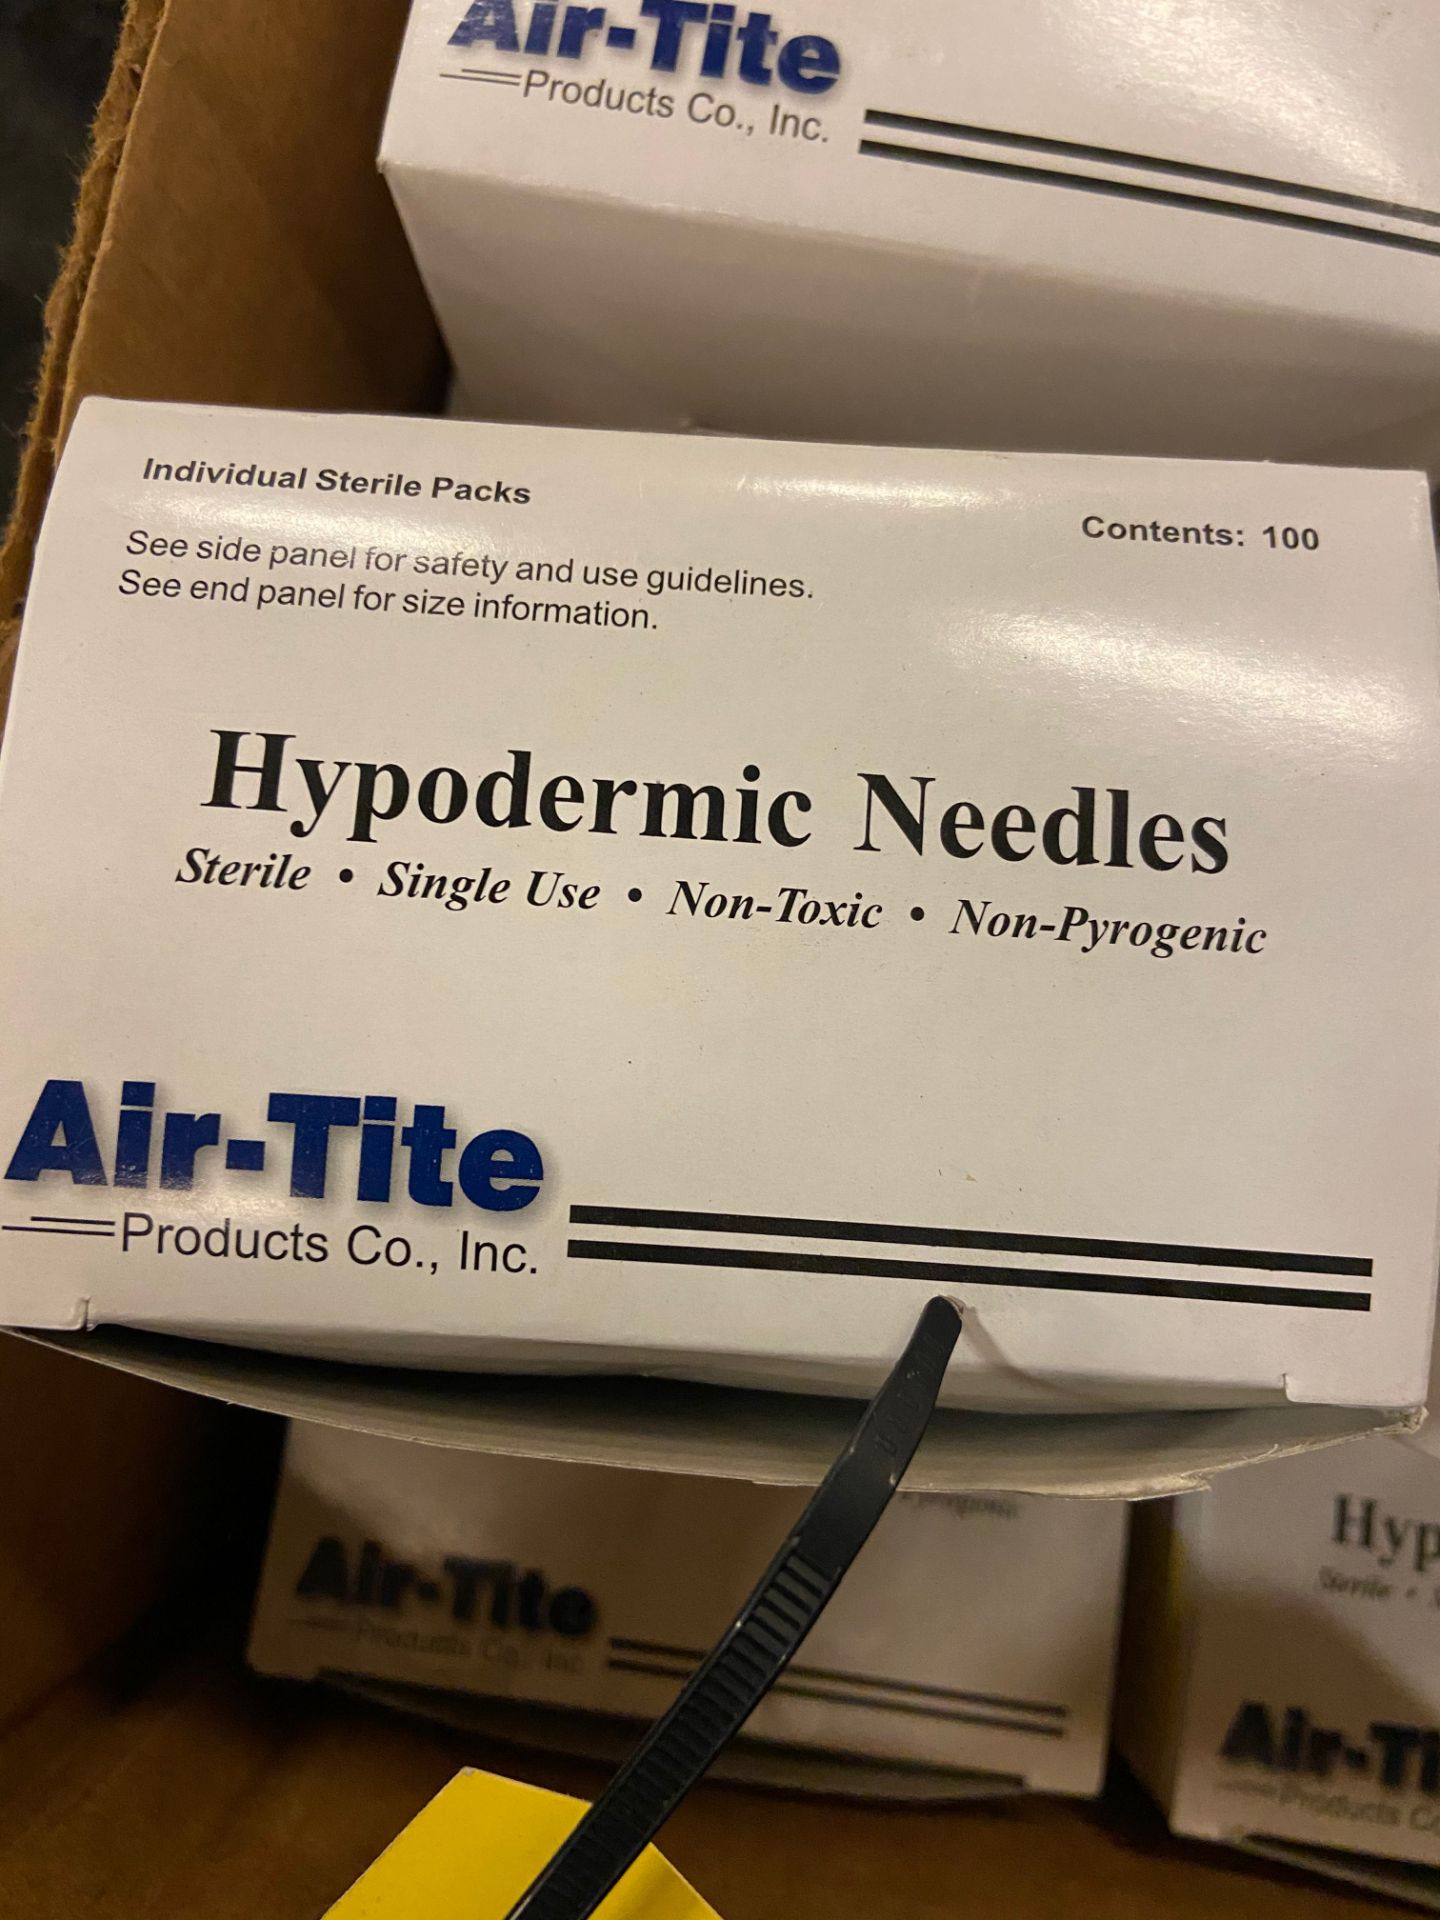 Box of Hypodermic Needles (All Pictured), 19G x 1", Ref# 8300015036, - Image 4 of 6